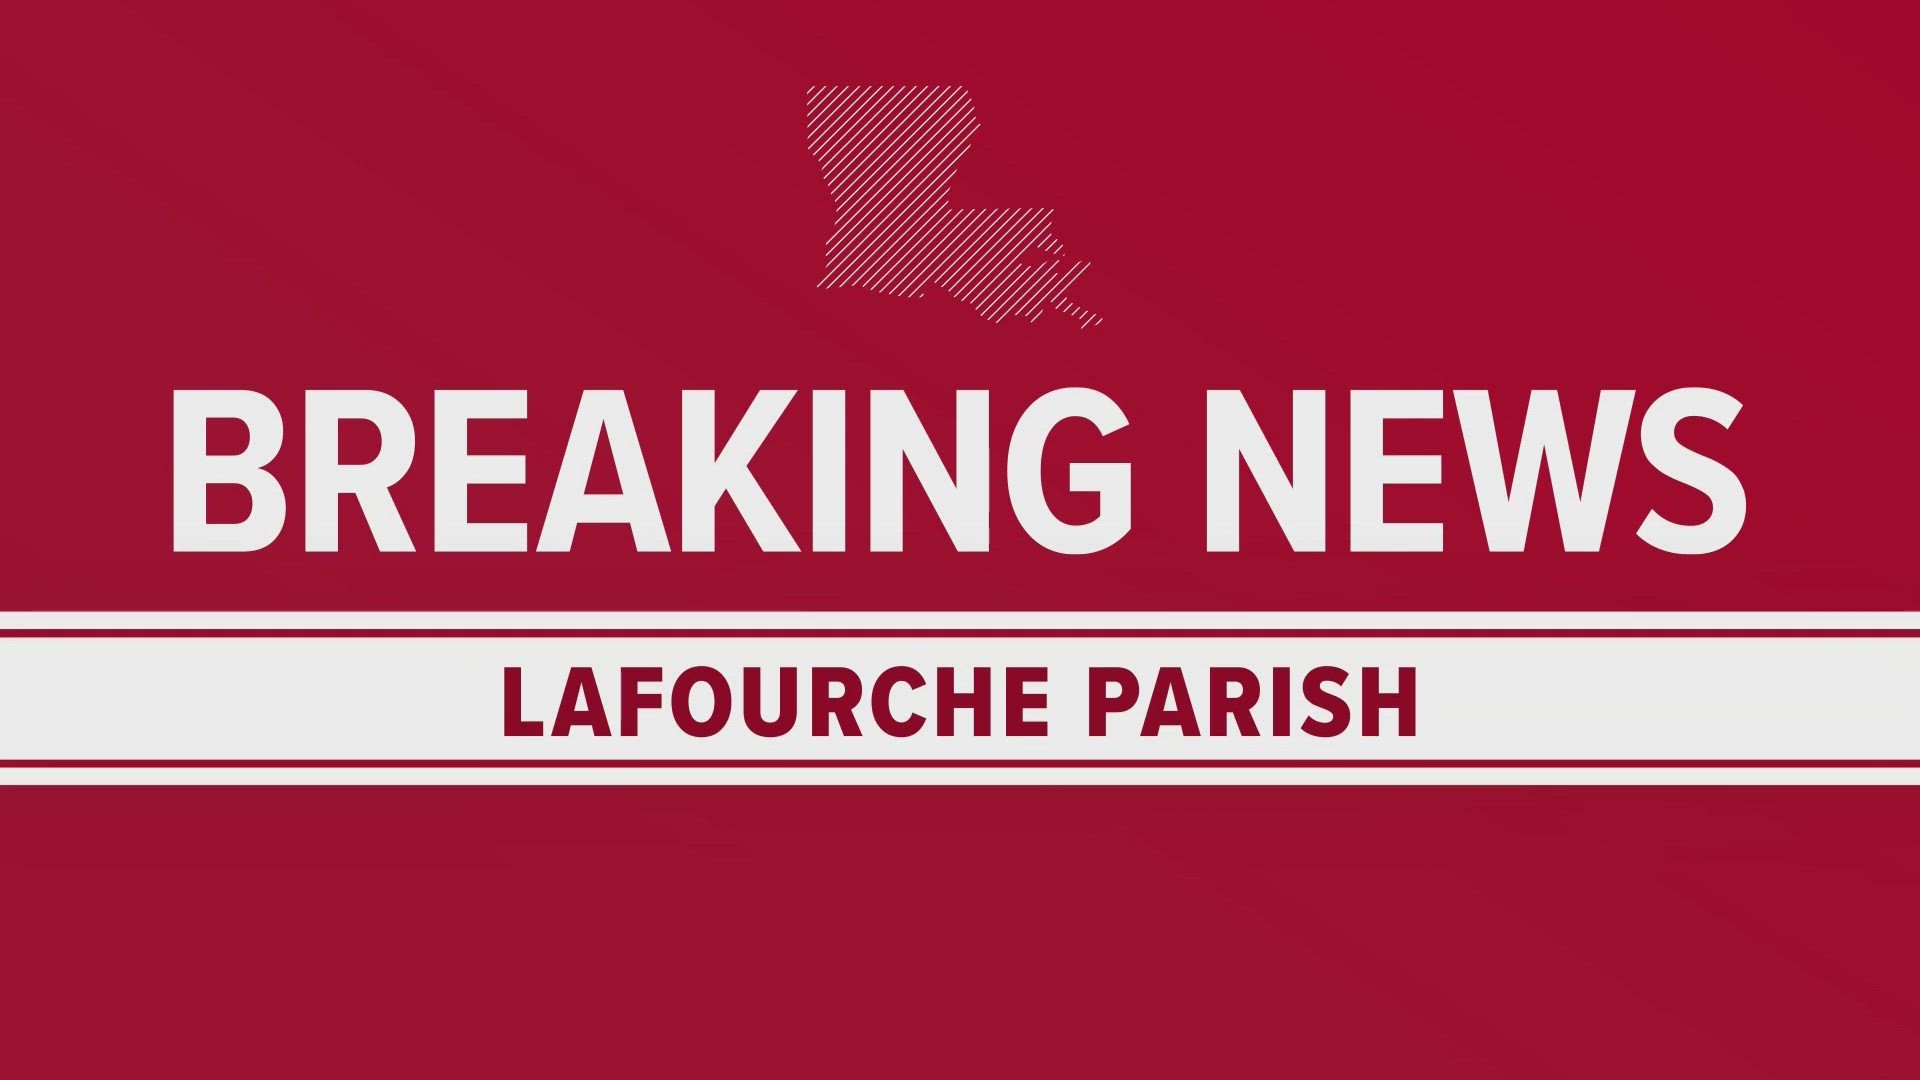 Central Lafourche High School, Career Magnet Center, all Lockport and all South Lafourche schools are closed on Friday, according to the school district.